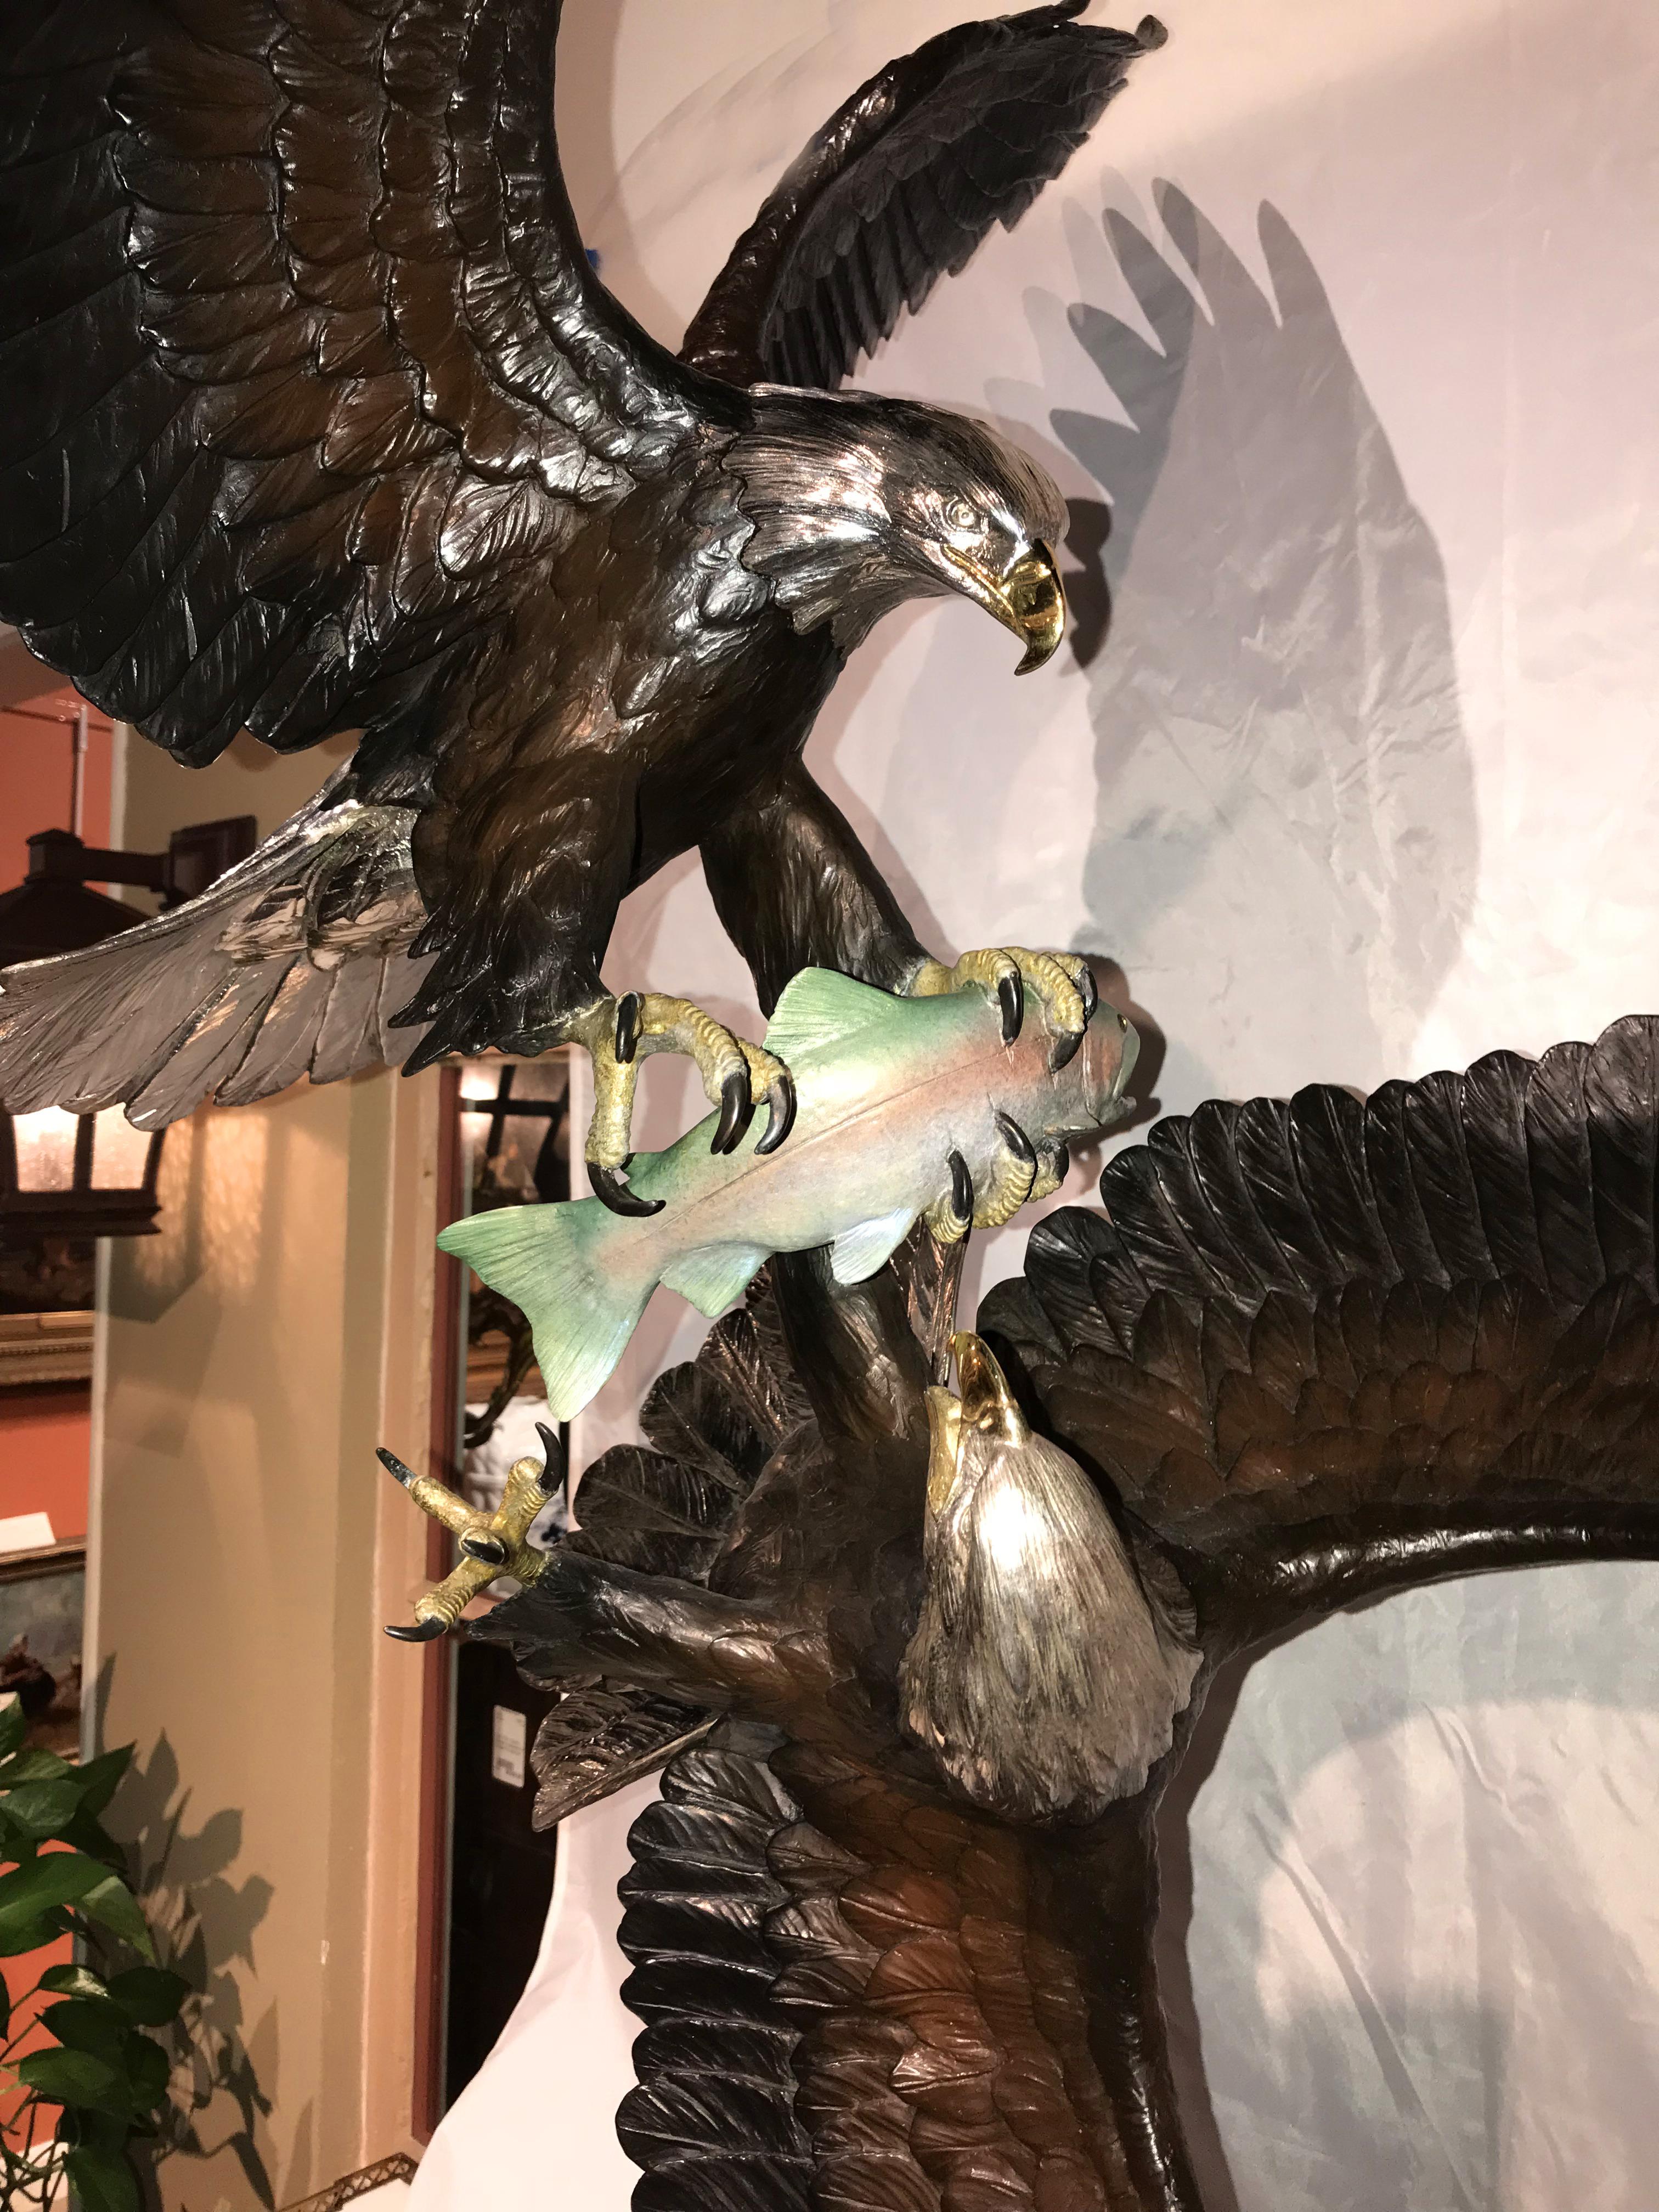 This exceptional limited edition cast and painted bronze of two bald eagles fighting for a trout was done by American sculptor Mike Curtis (20th/21 century). Mike Curtis, a resident of Idaho with a studio near Lake Pend Oreille, is well known for